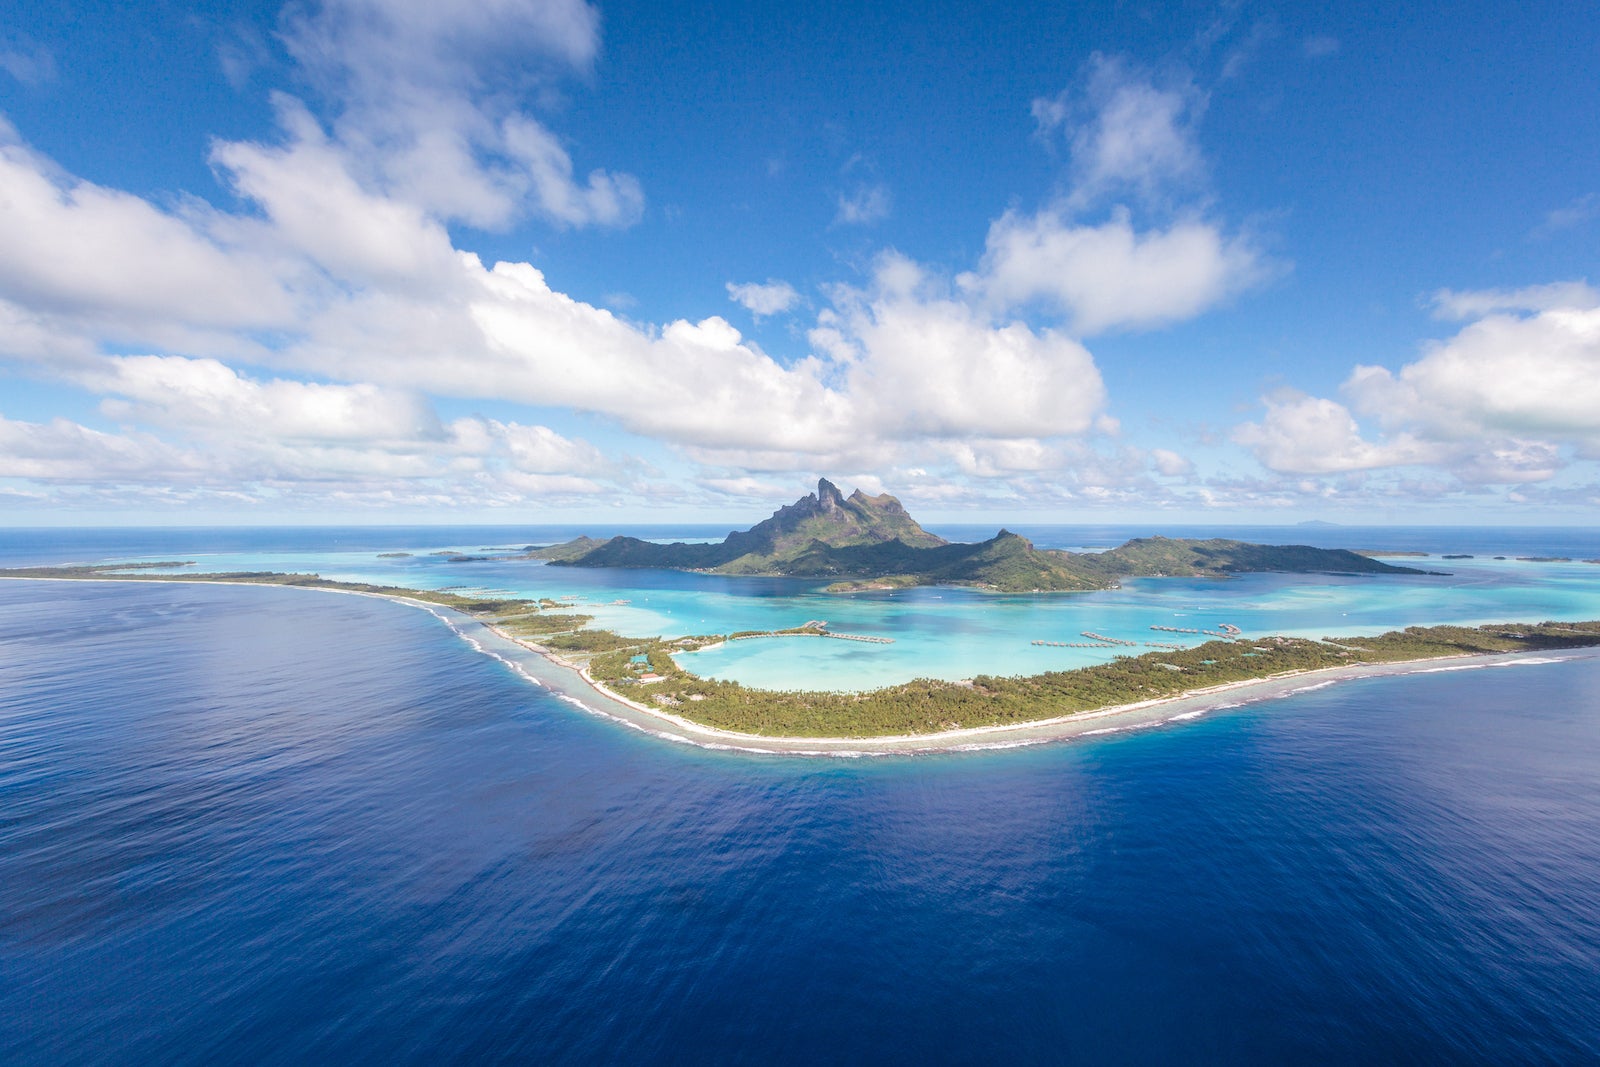 You are currently viewing Round-trip fares to French Polynesia starting at $600 through February